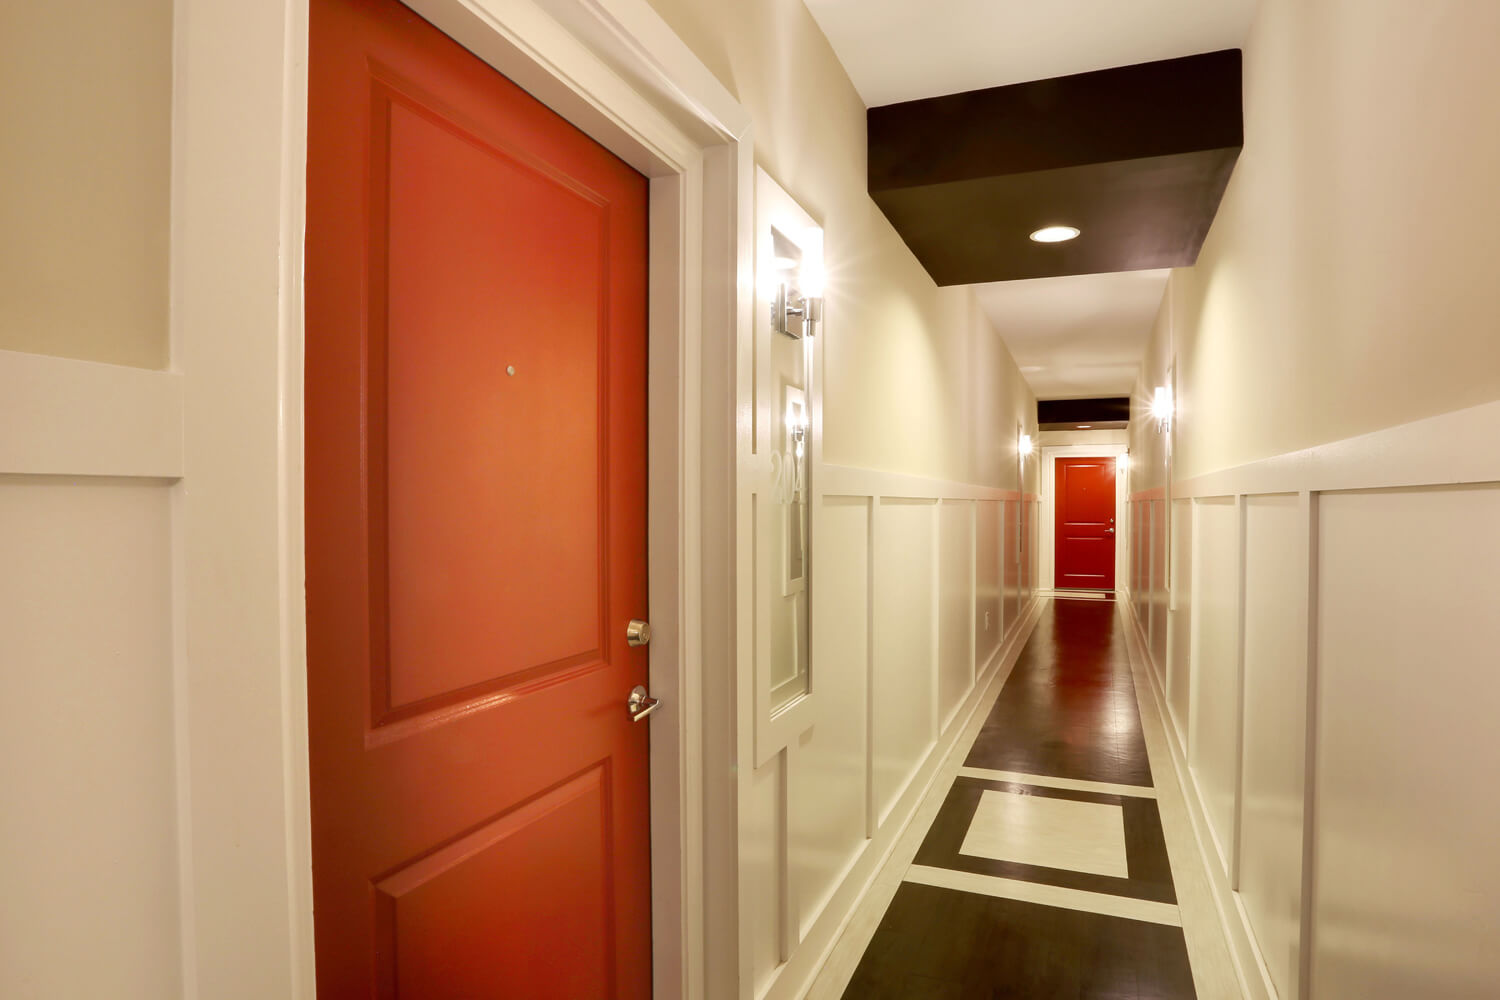 The 40 Four Building Designed by Foshee Architecture – View of Interior Hallway